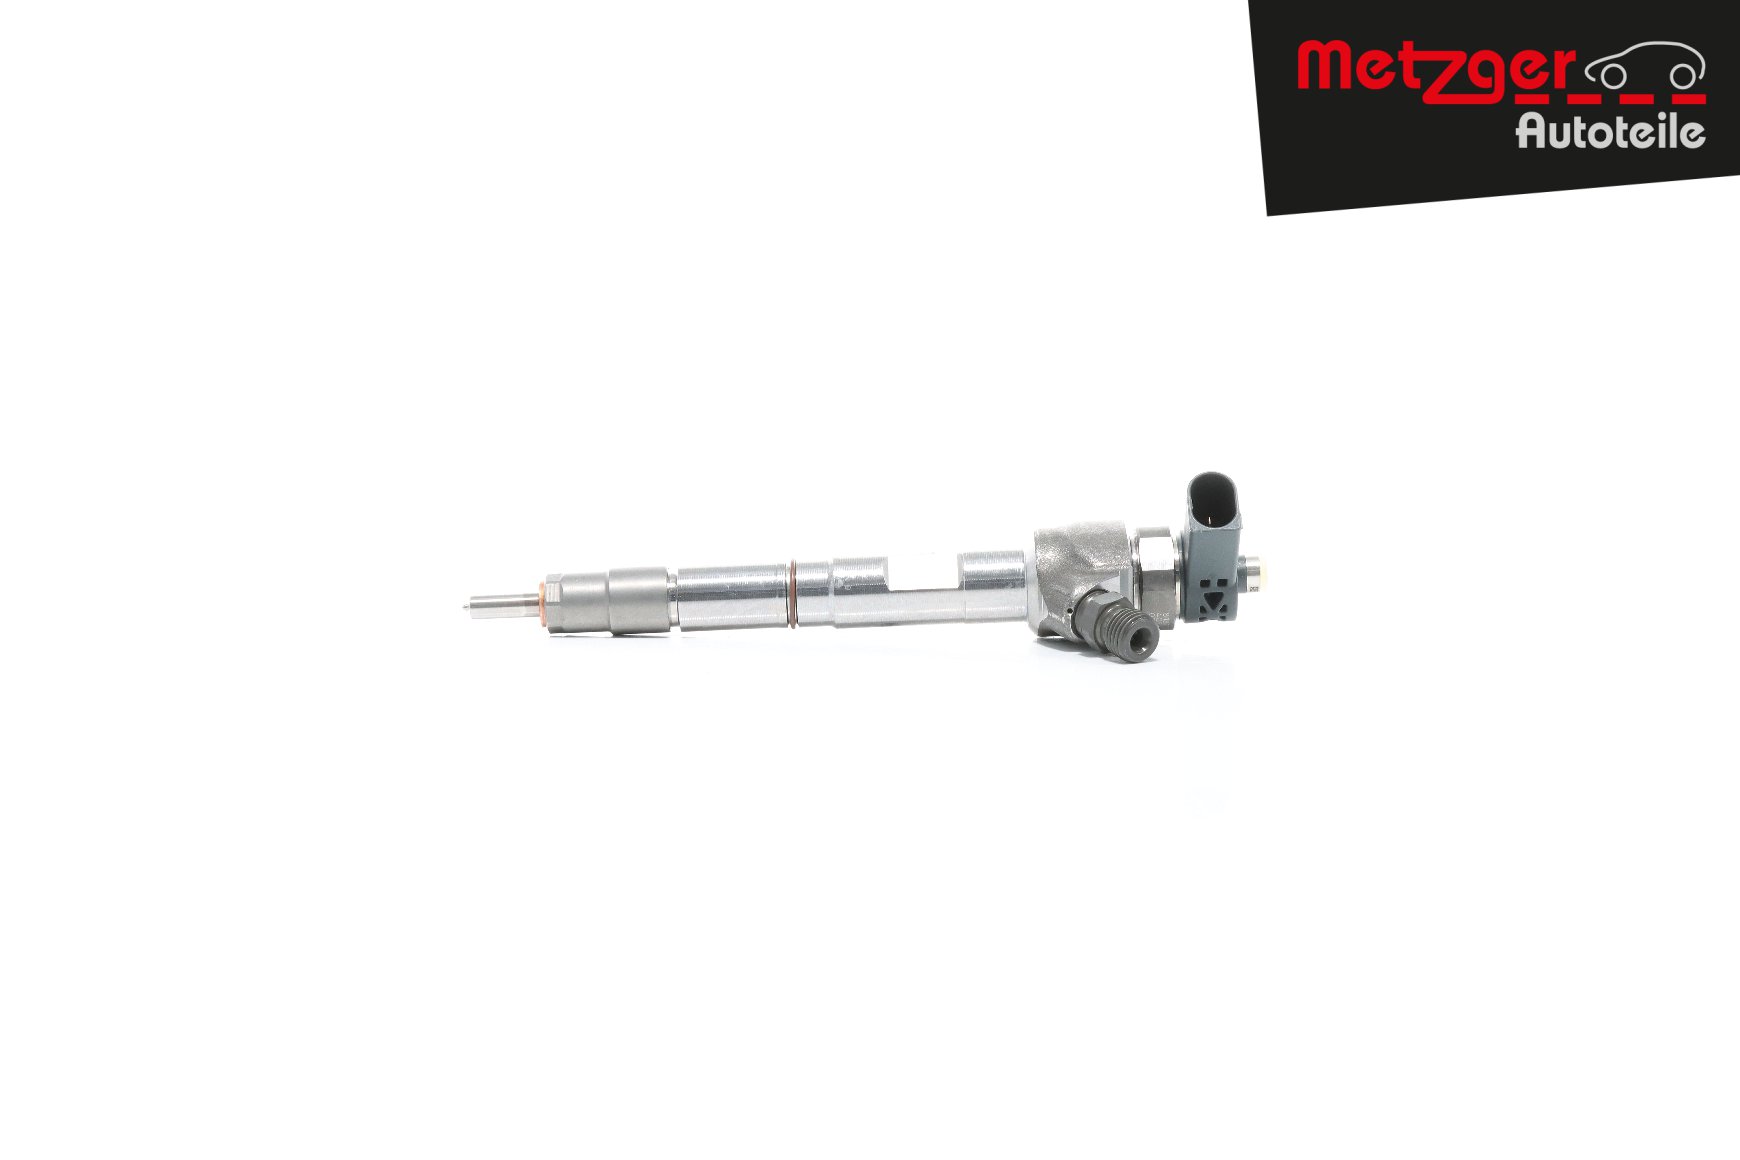 METZGER Injector diesel and petrol VW TIGUAN (AD1) new 0871033